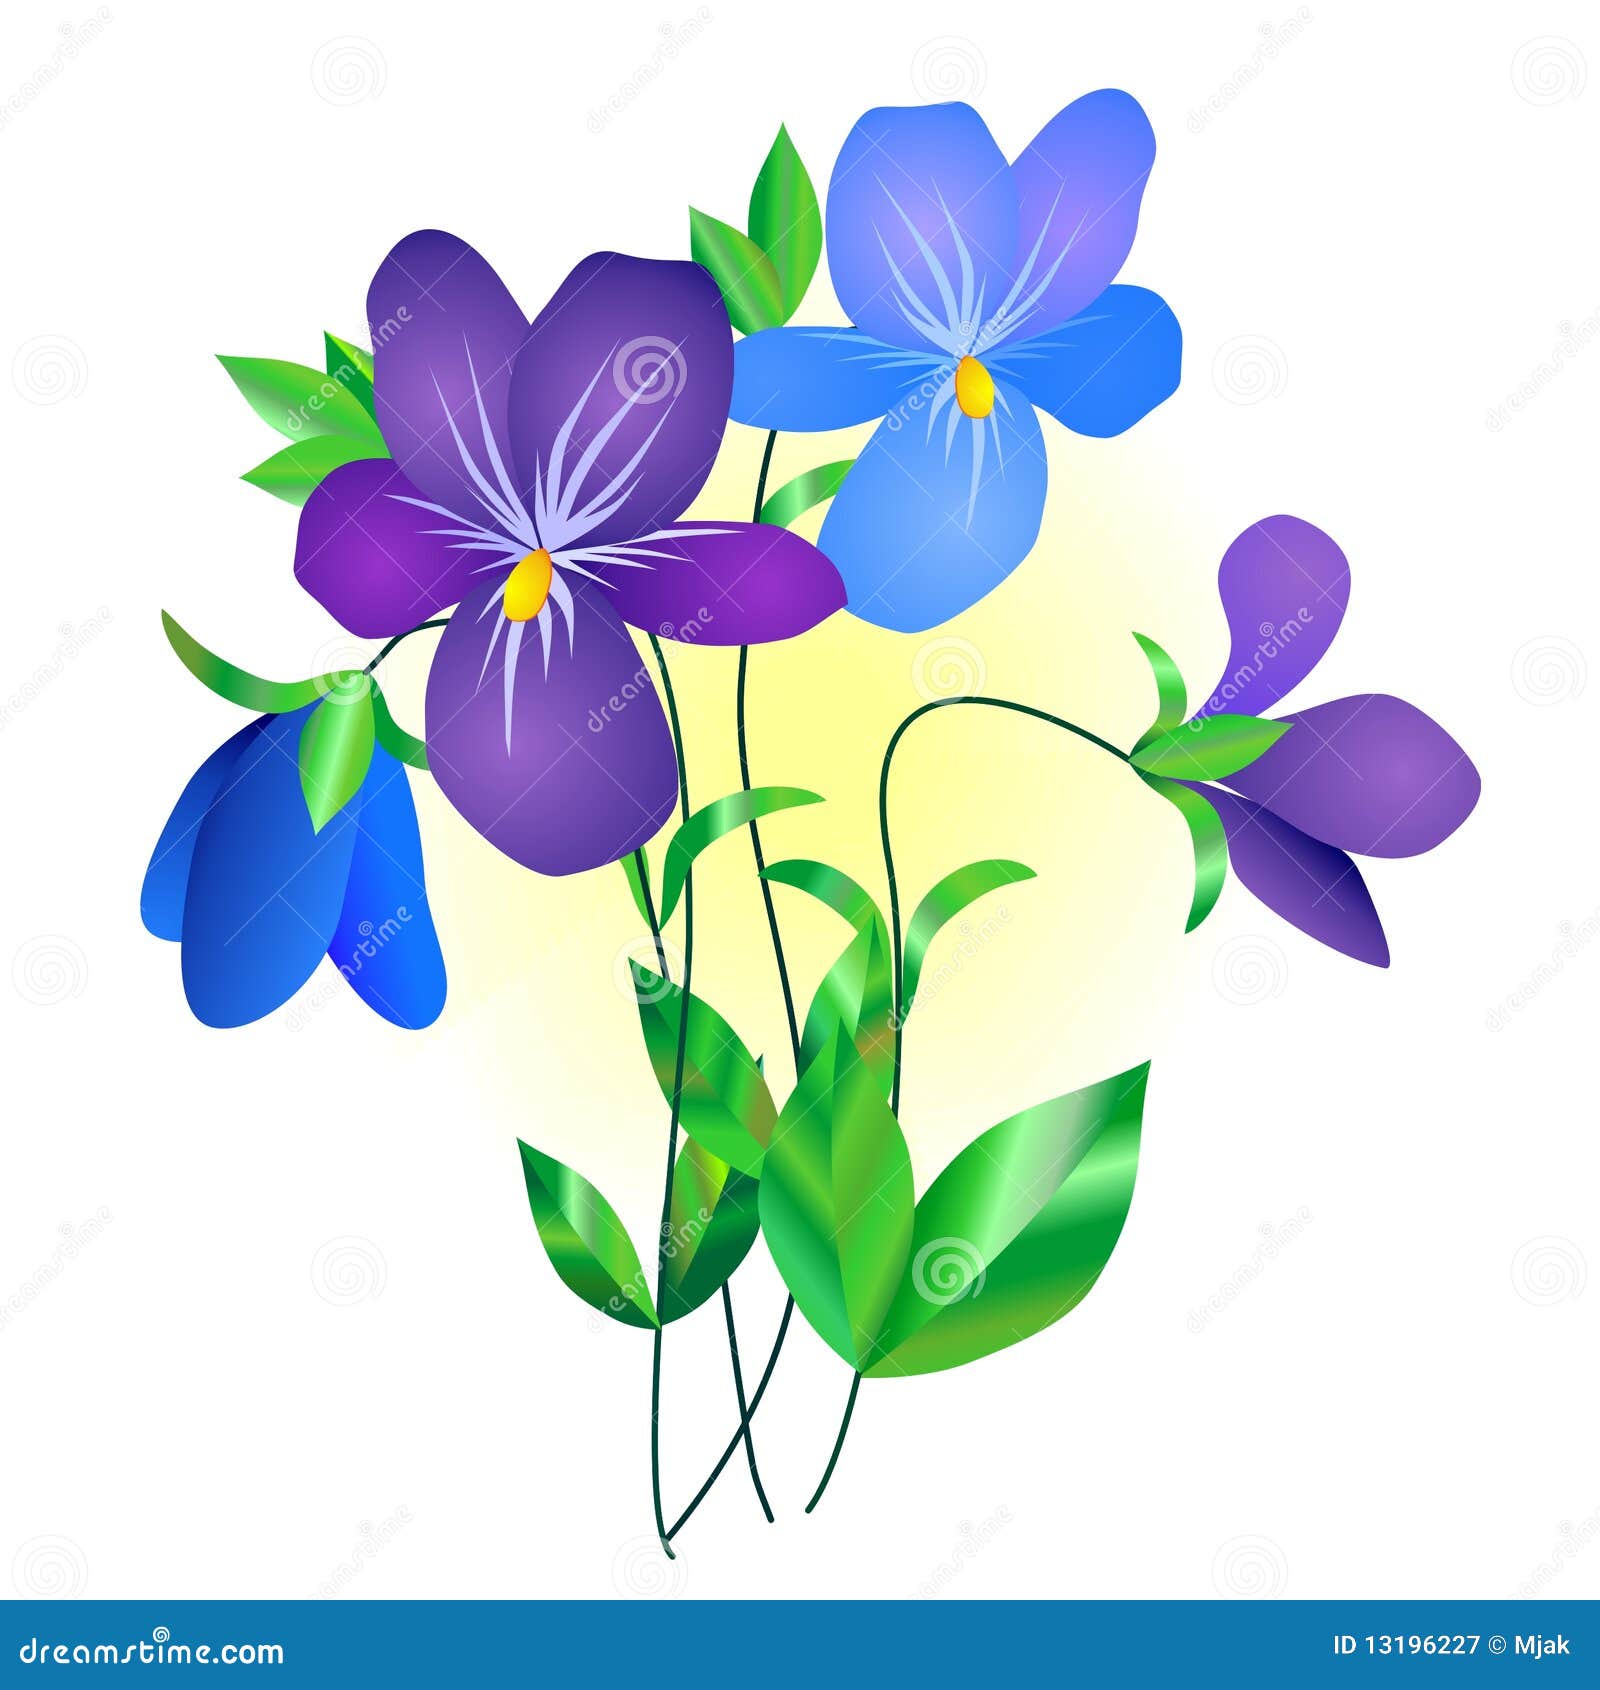 clipart african violets - photo #27